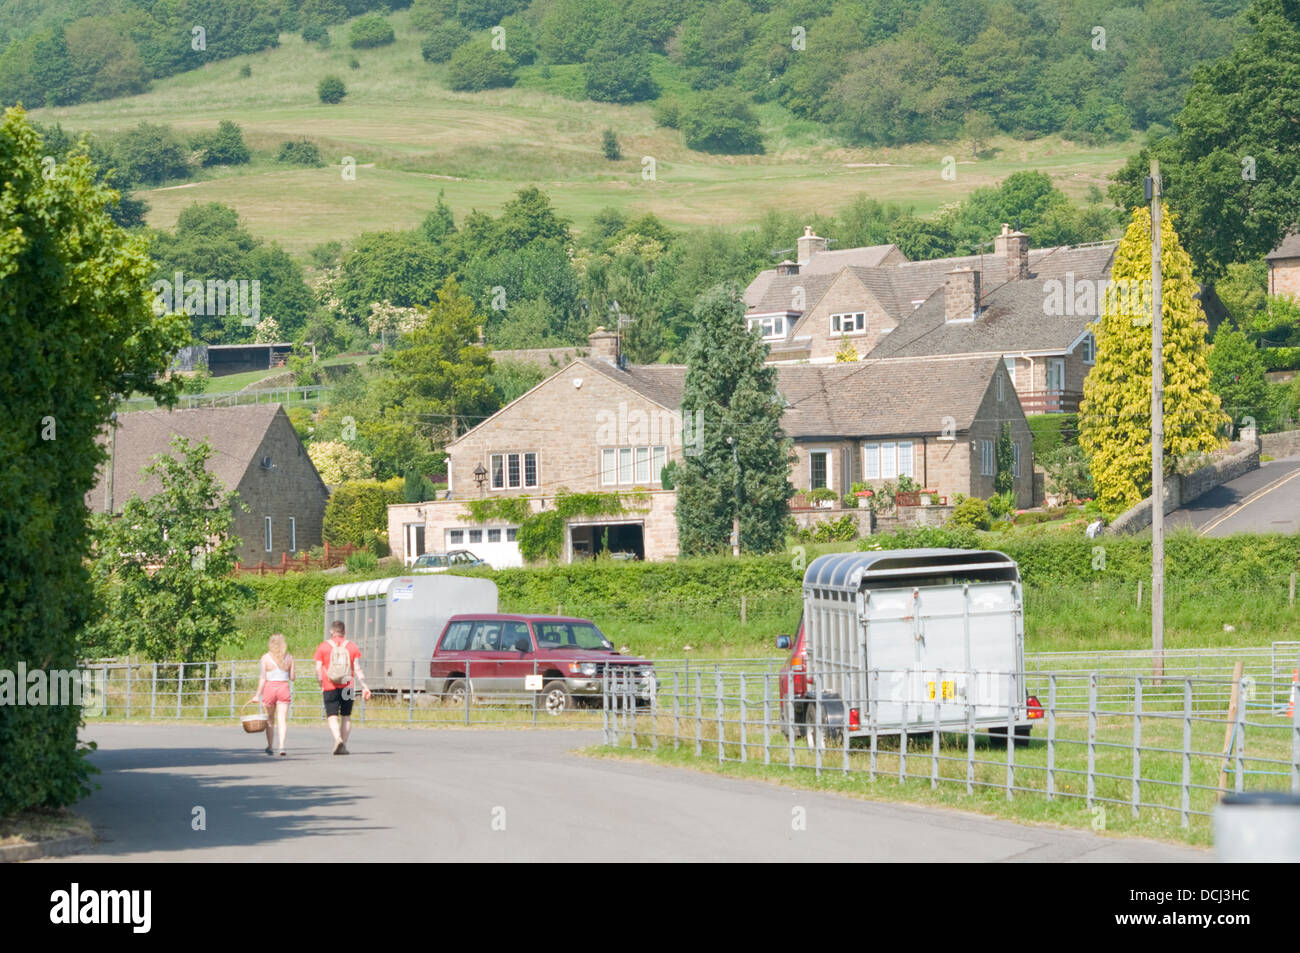 Landscape shot of Bakewell UK, countryside with a couple of people and some houses and two livestock trailers. Stock Photo